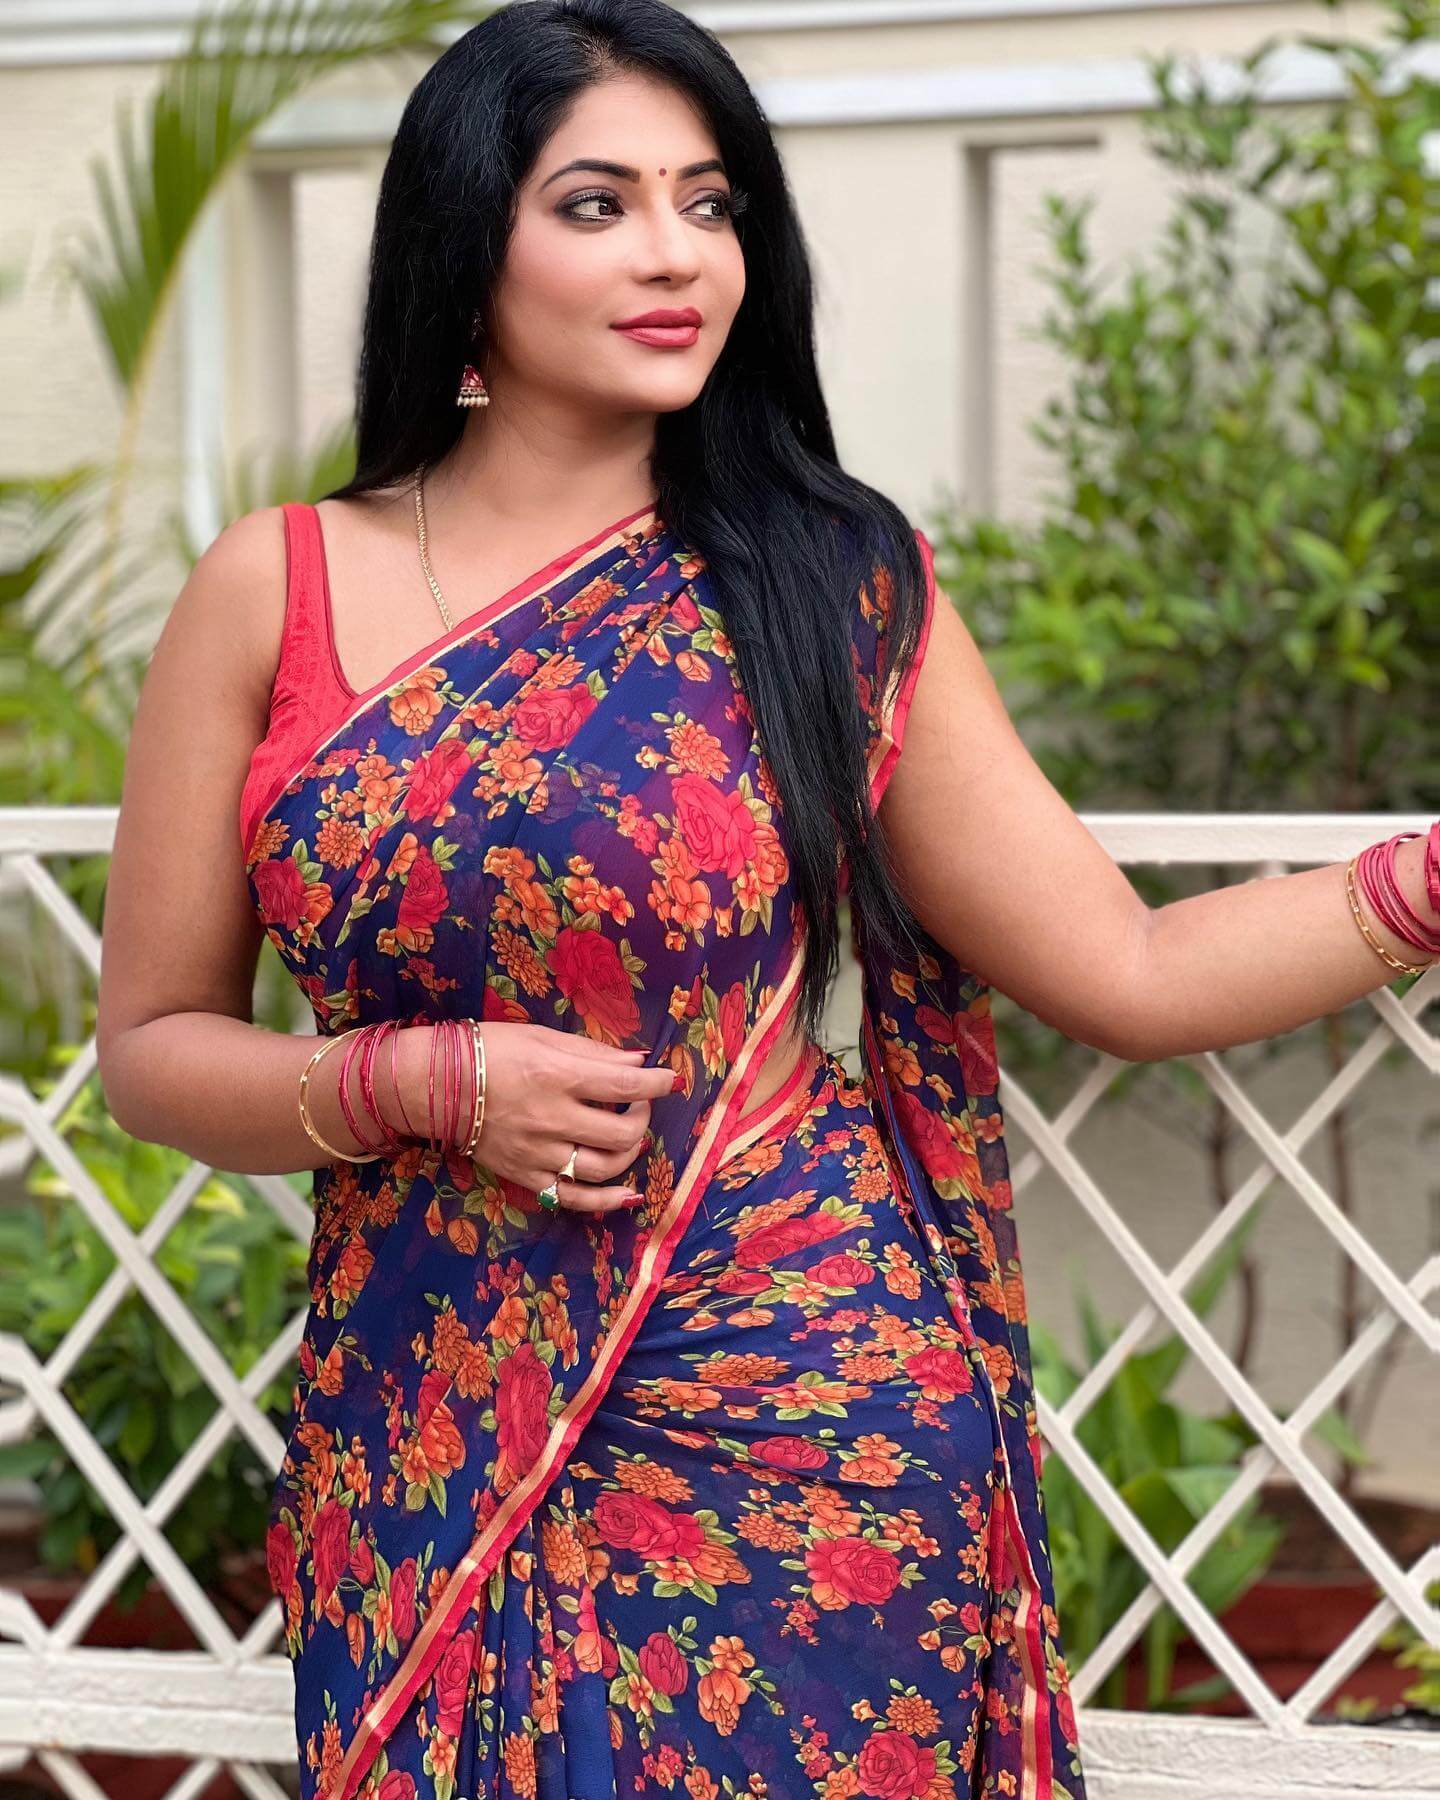 Beauty Bae Reshma Pasupuleti In Blue Floral Printed Saree With Red Sleeveless Blouse